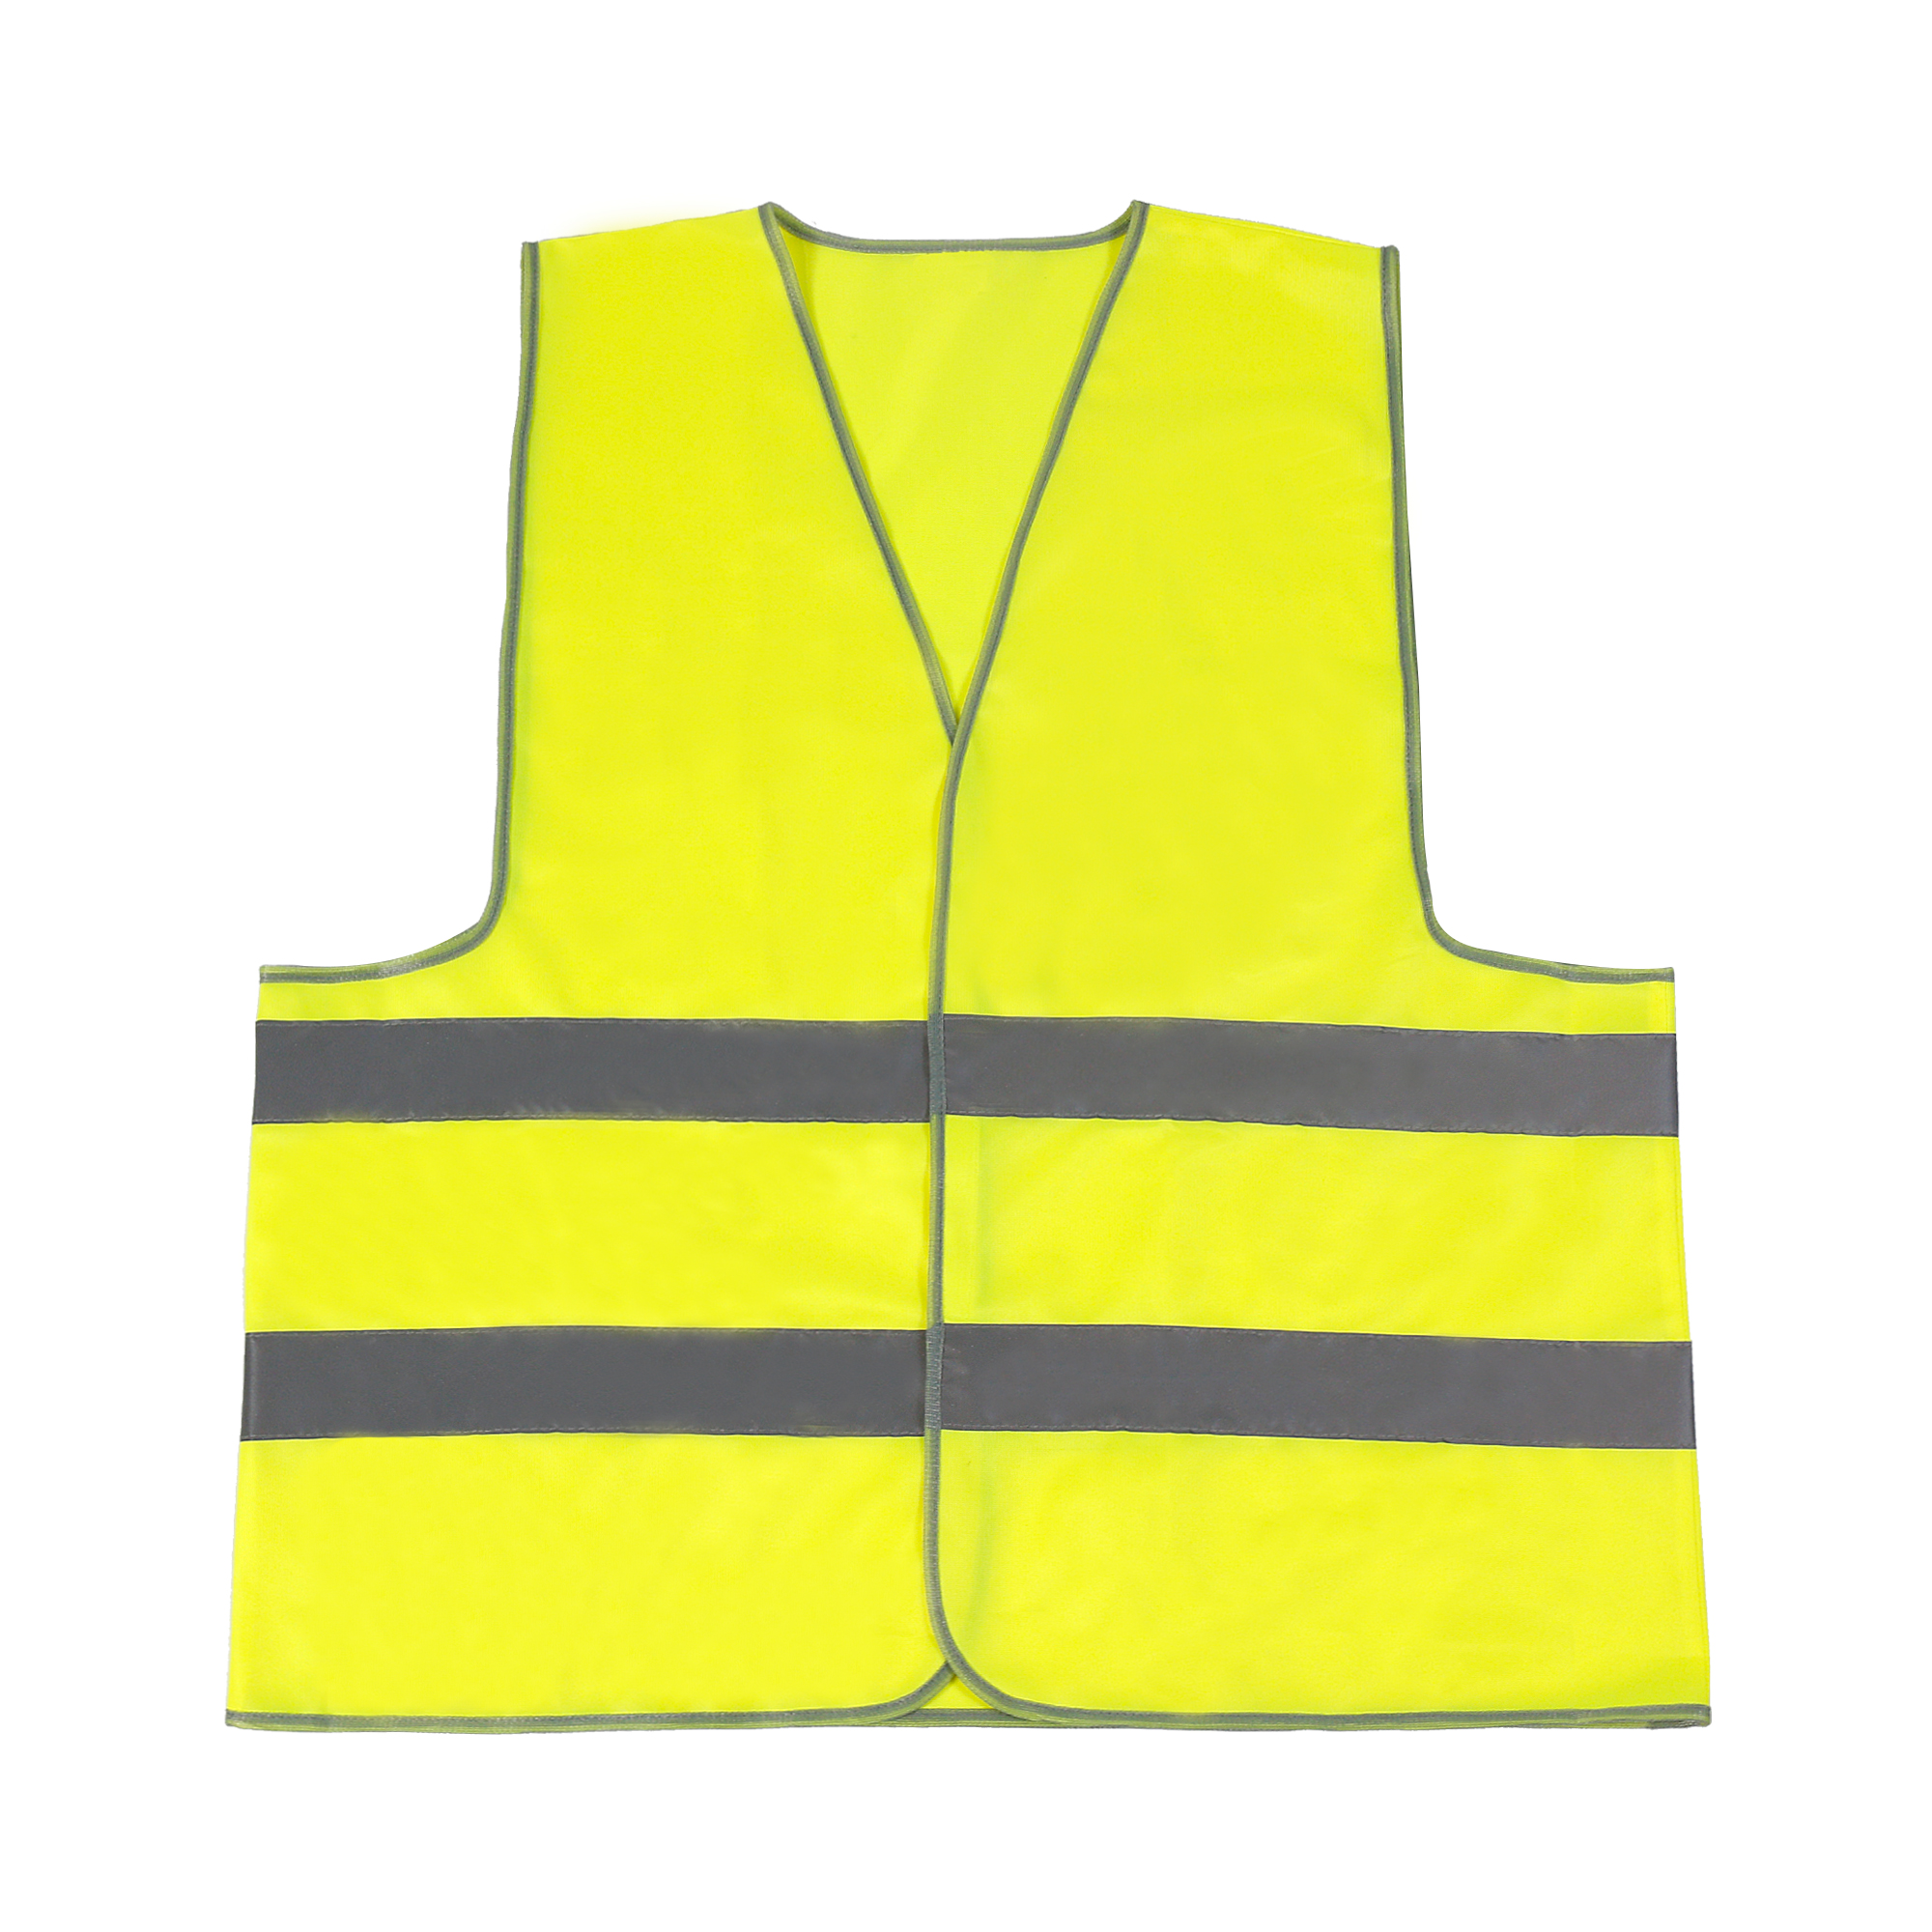 Wearing a Safe Vest to ensure Personal Safety